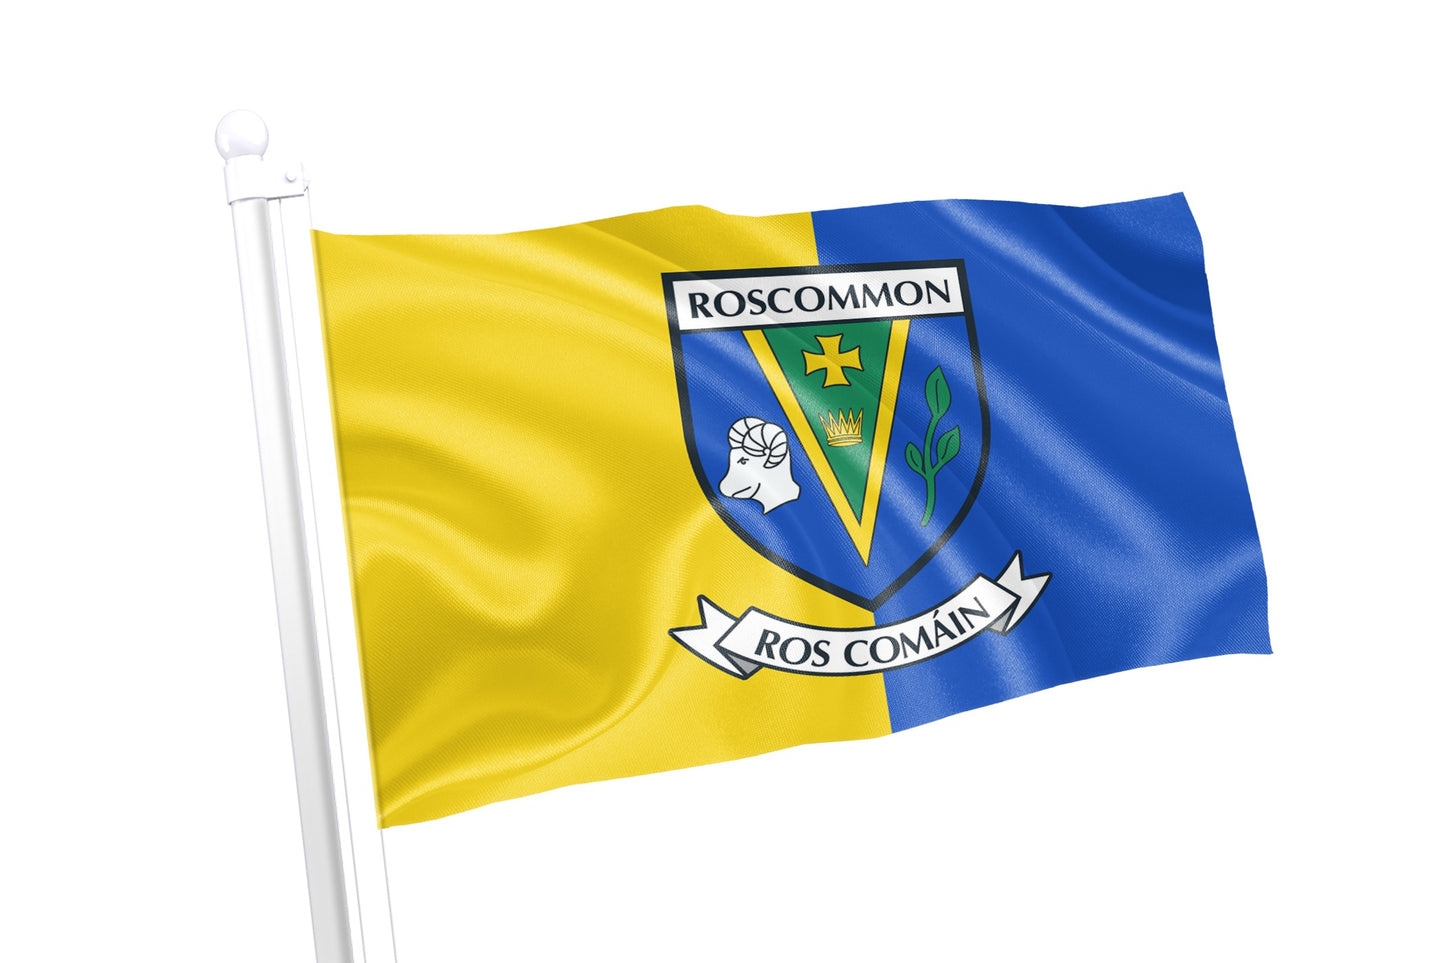 Wappenflagge des Roscommon County